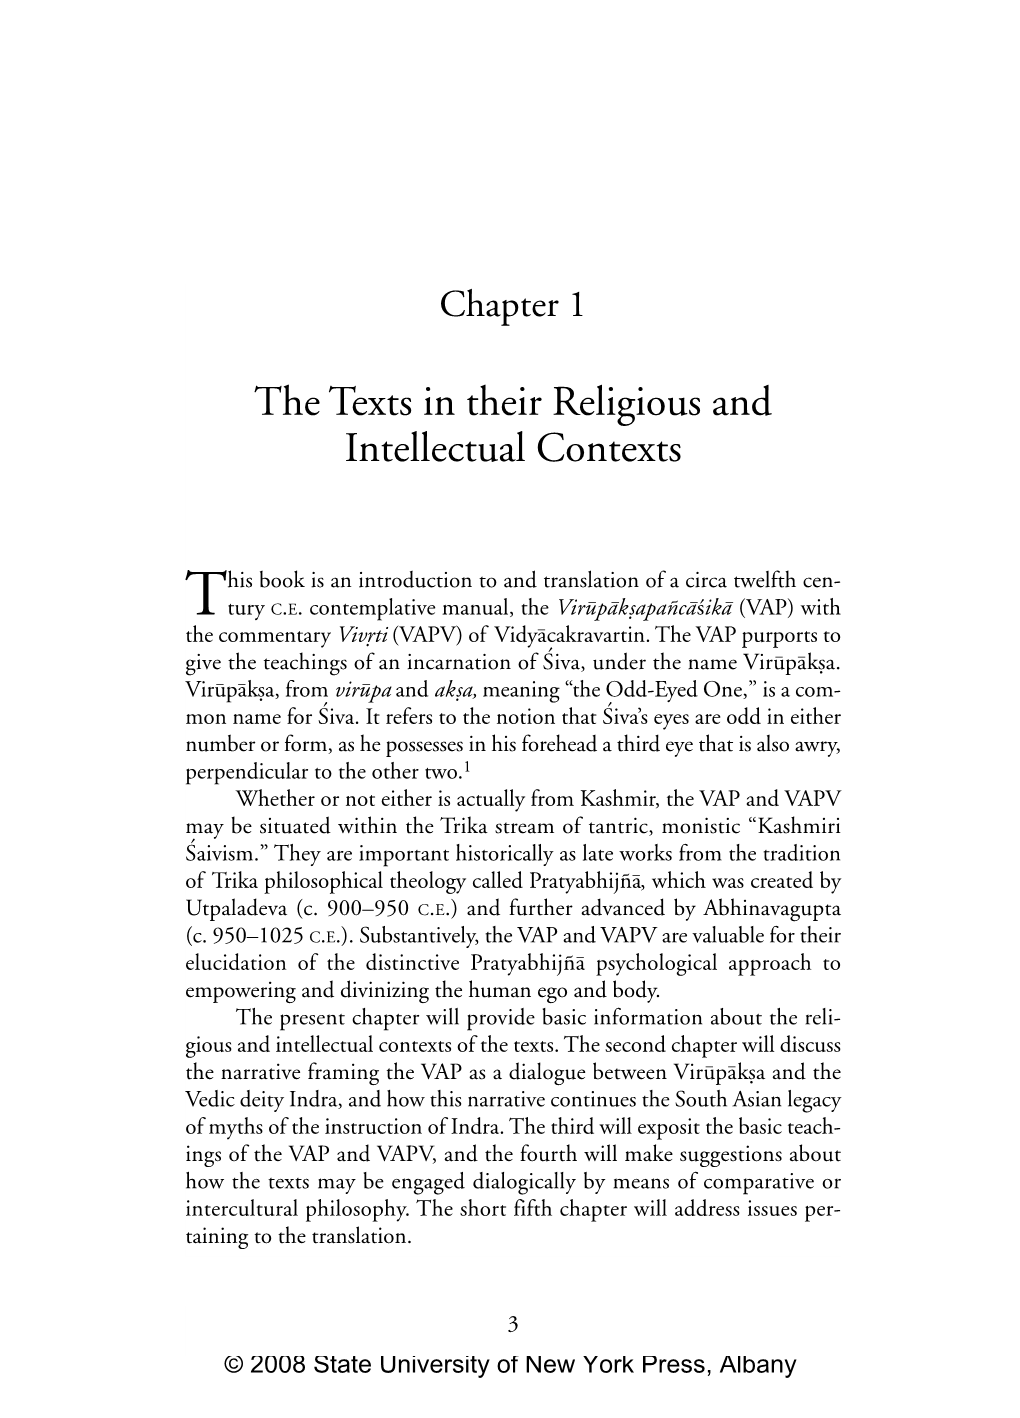 The Texts in Their Religious and Intellectual Contexts